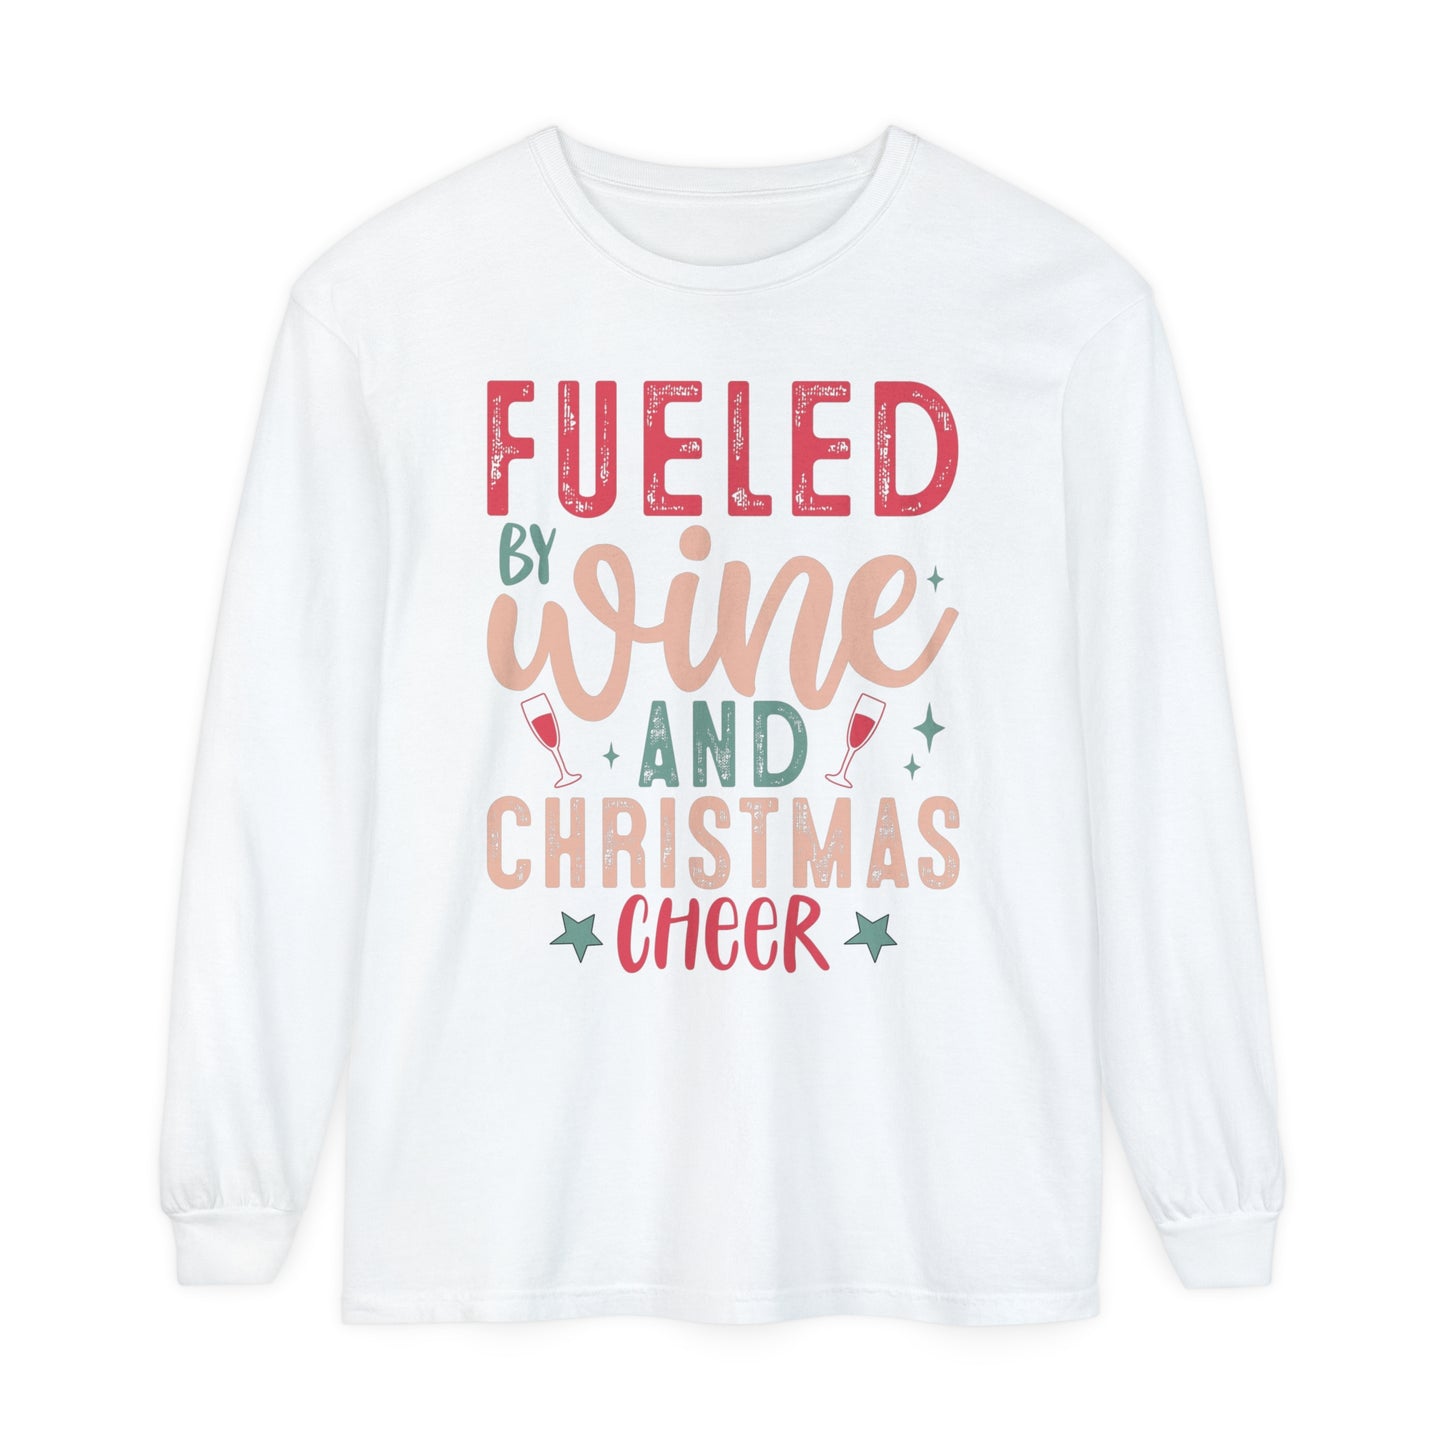 Fueled by Wine and Christmas Cheer Women's Christmas Loose Long Sleeve T-Shirt